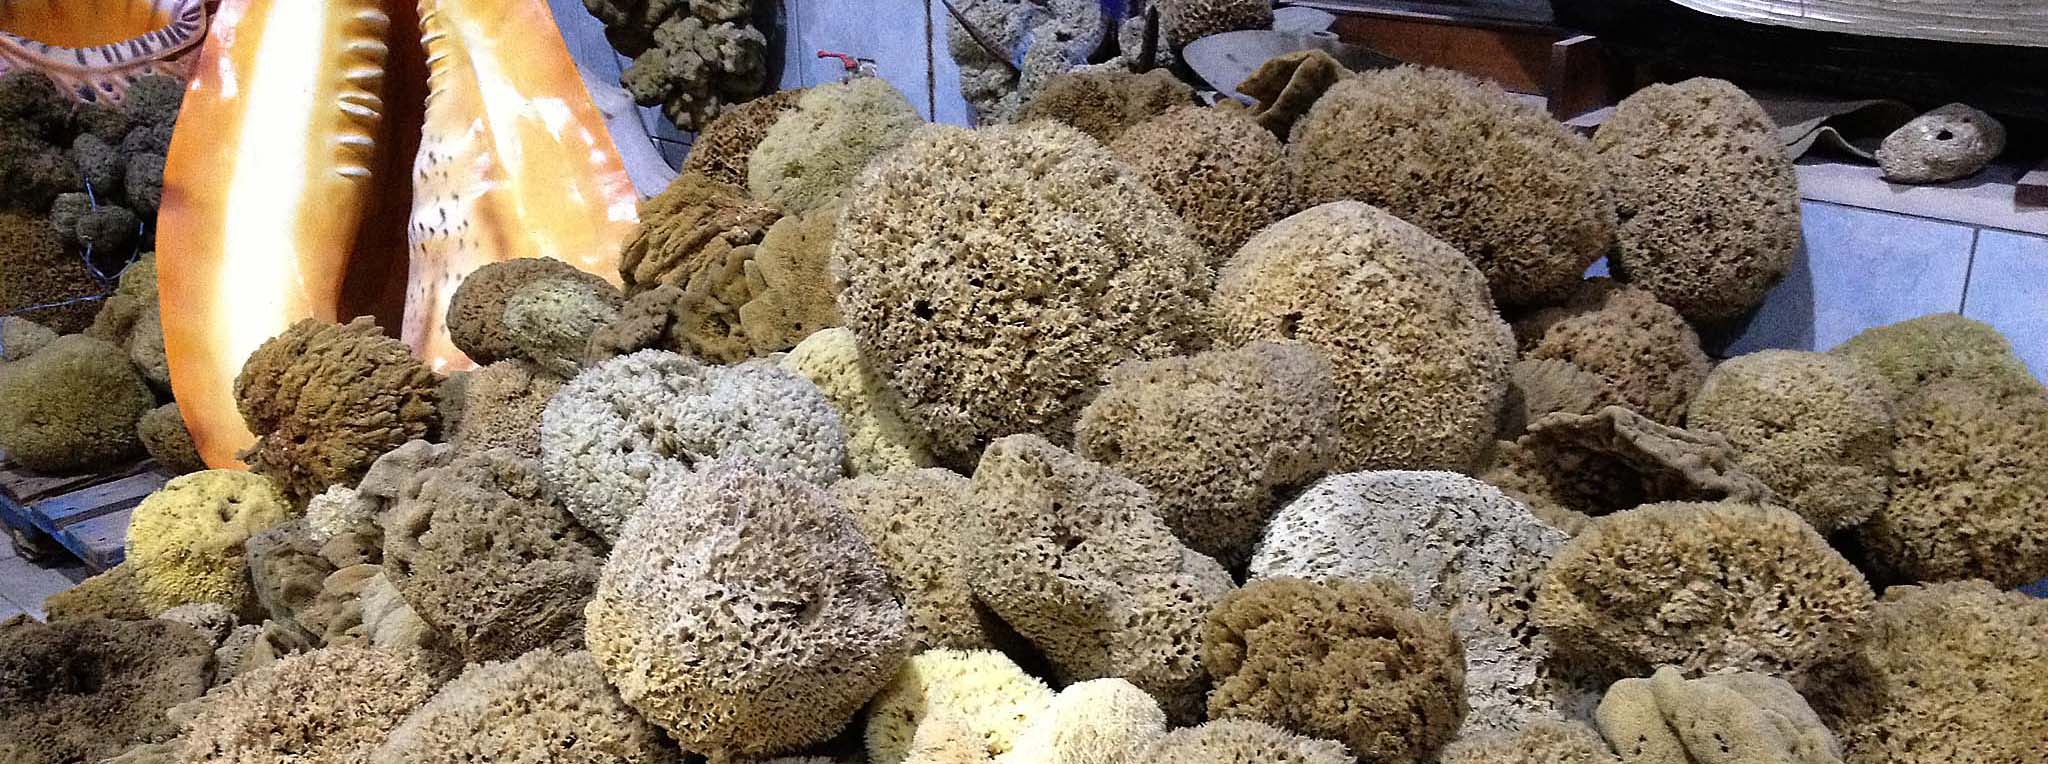 sea sponges at the Old Port Center